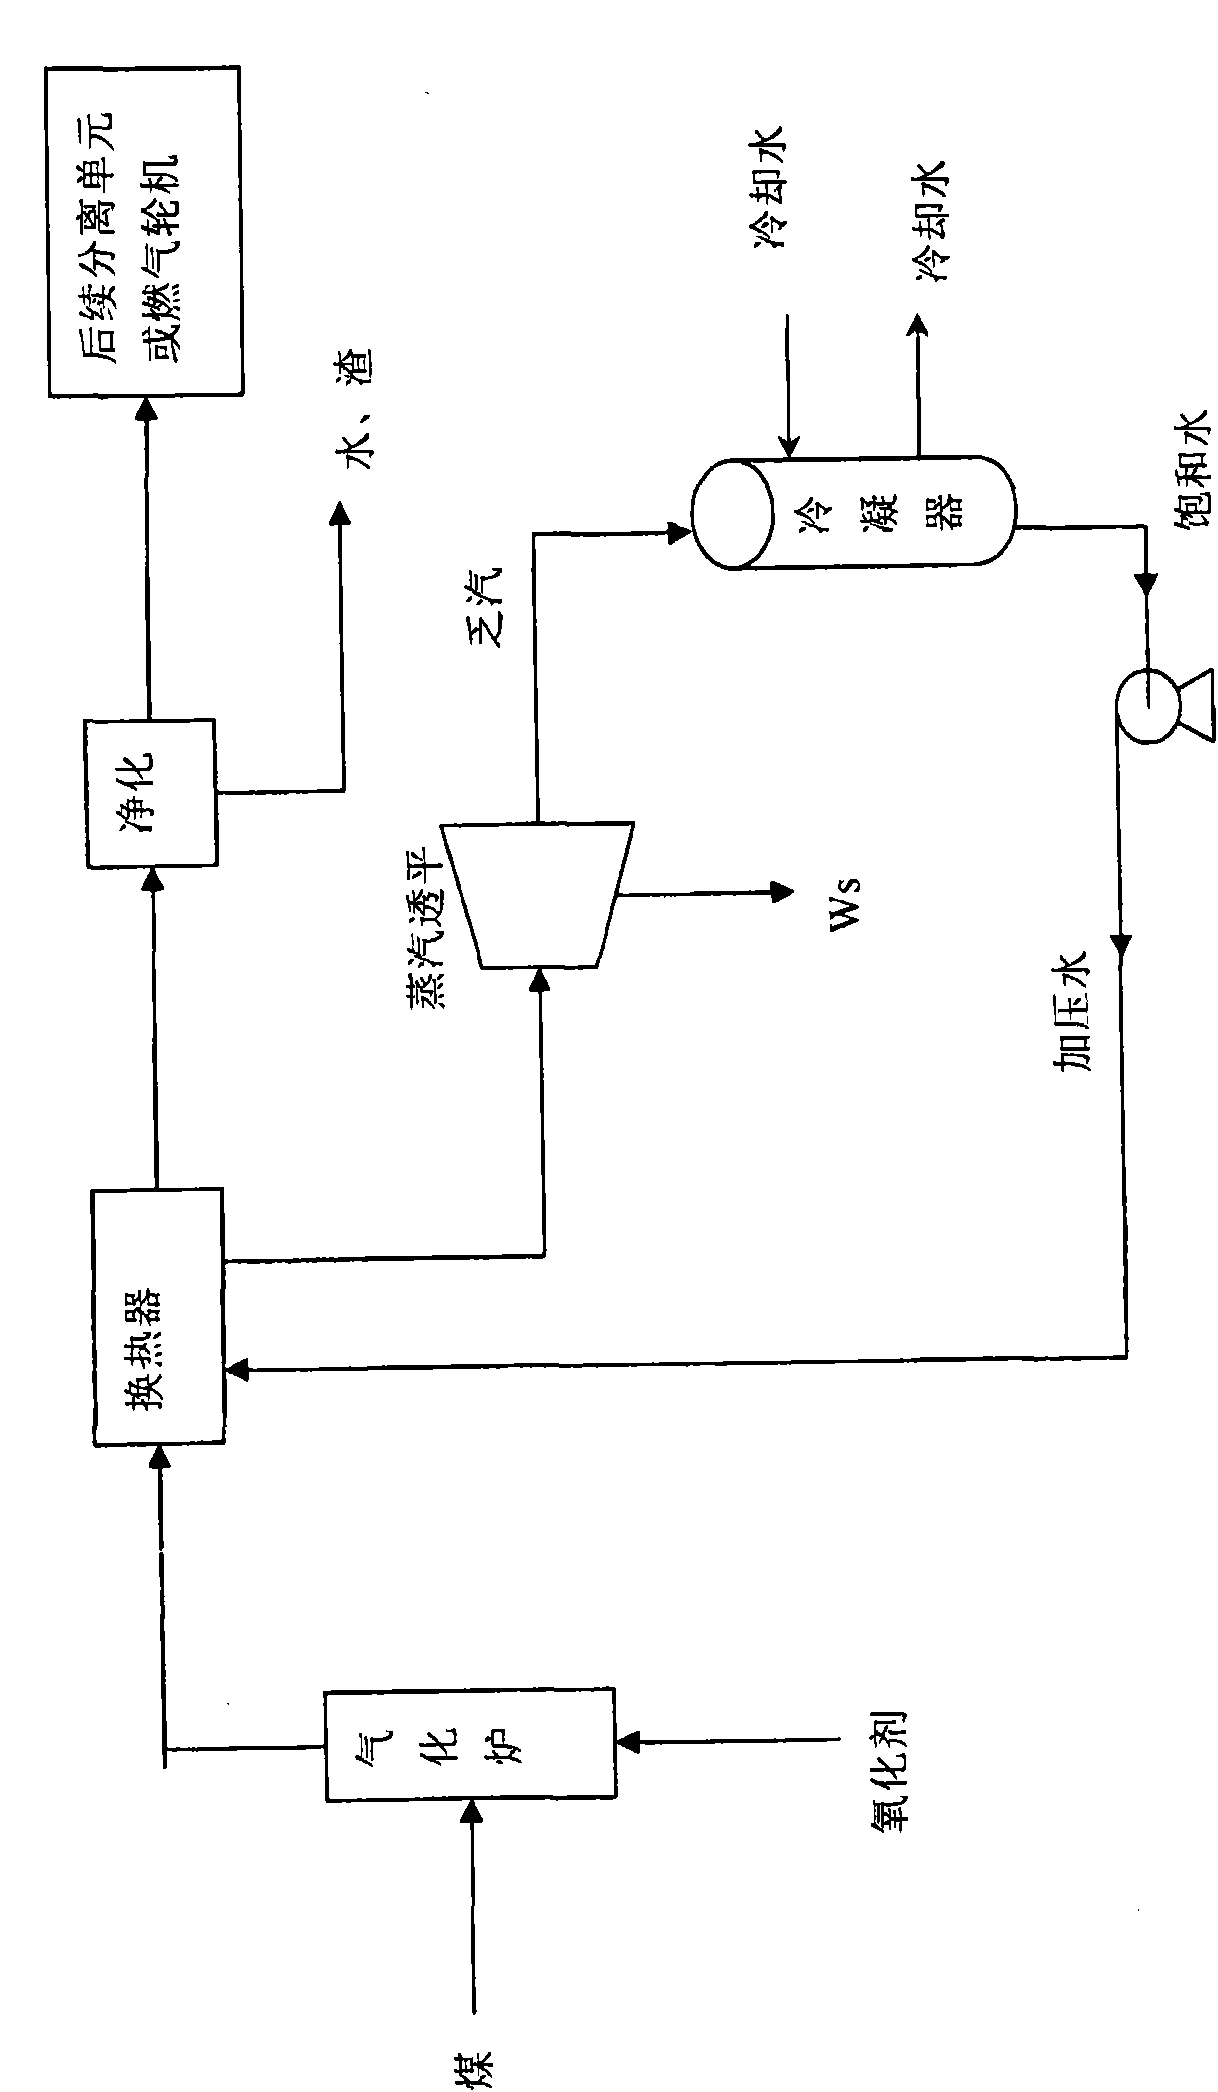 Coupling method of coal gasification process, residual carbon oxidation process and steam turbine power generation process